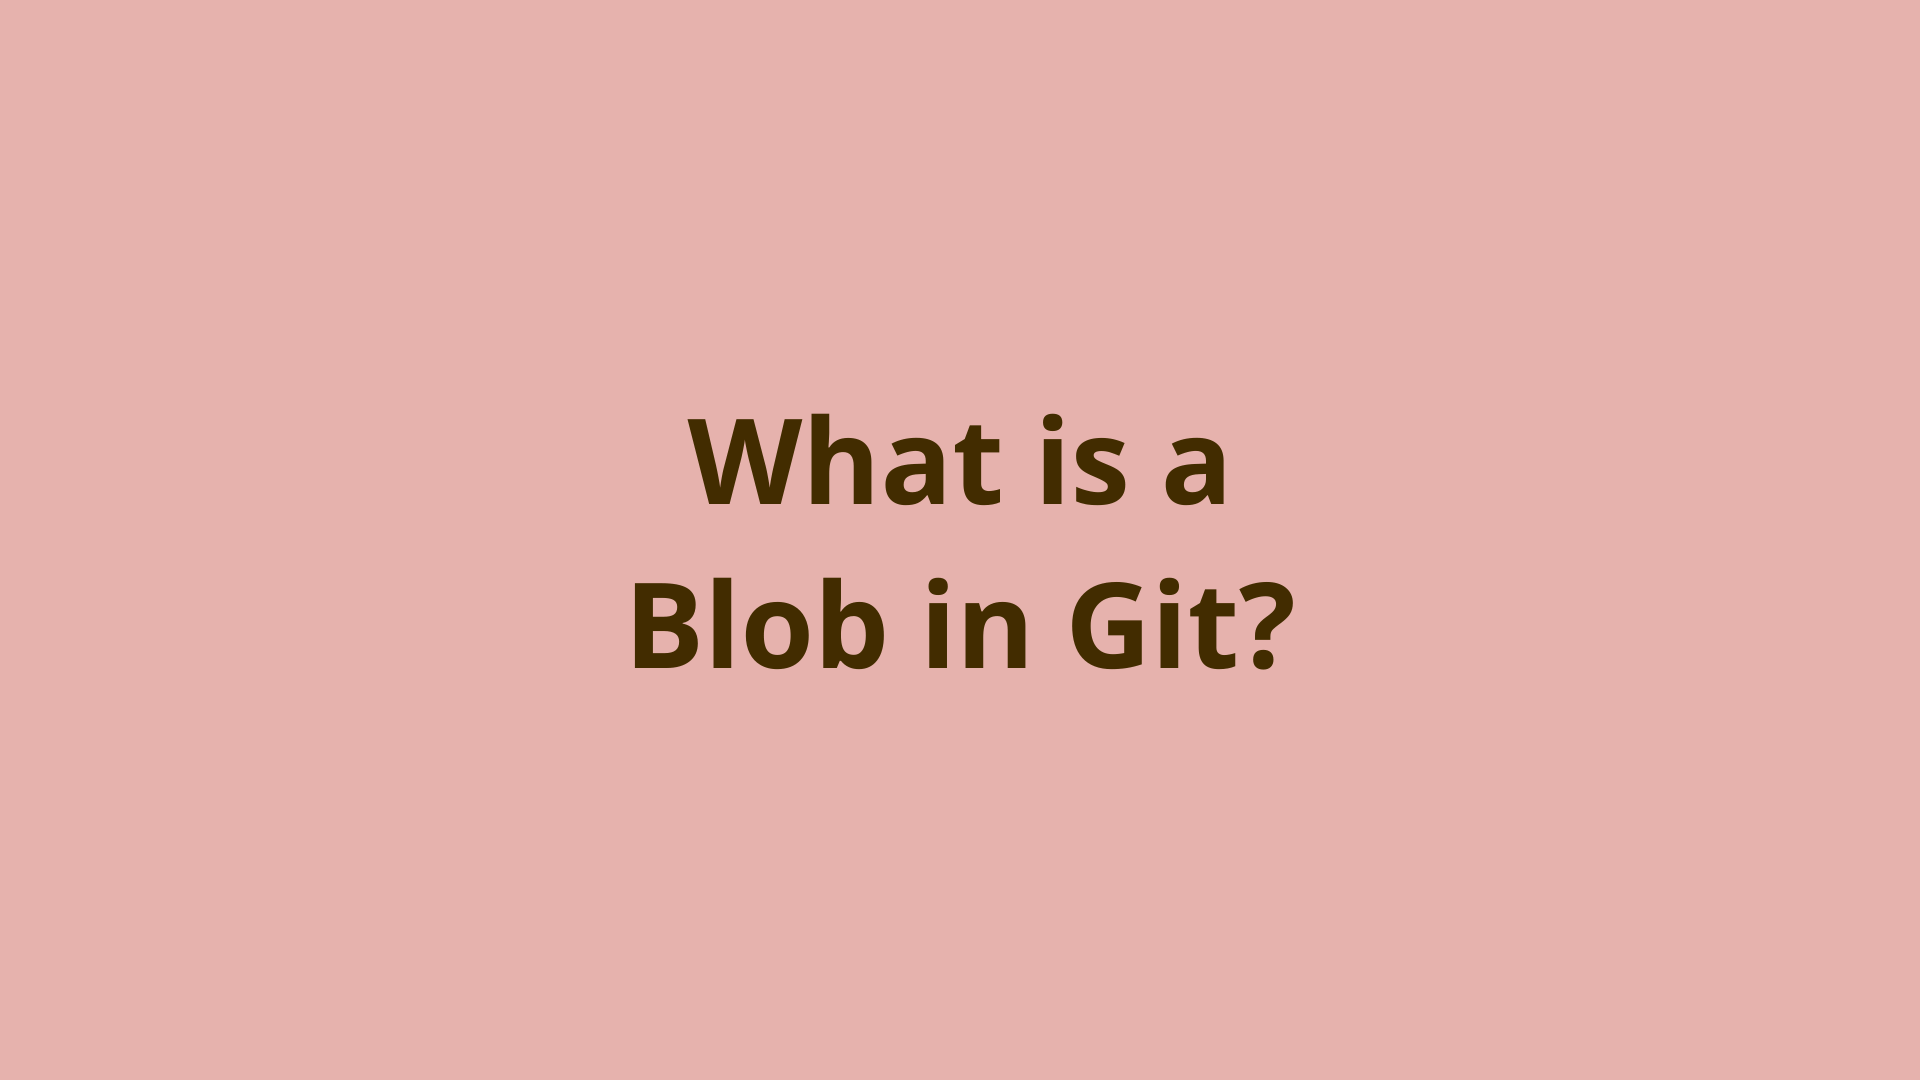 Image of What is a blob in Git?